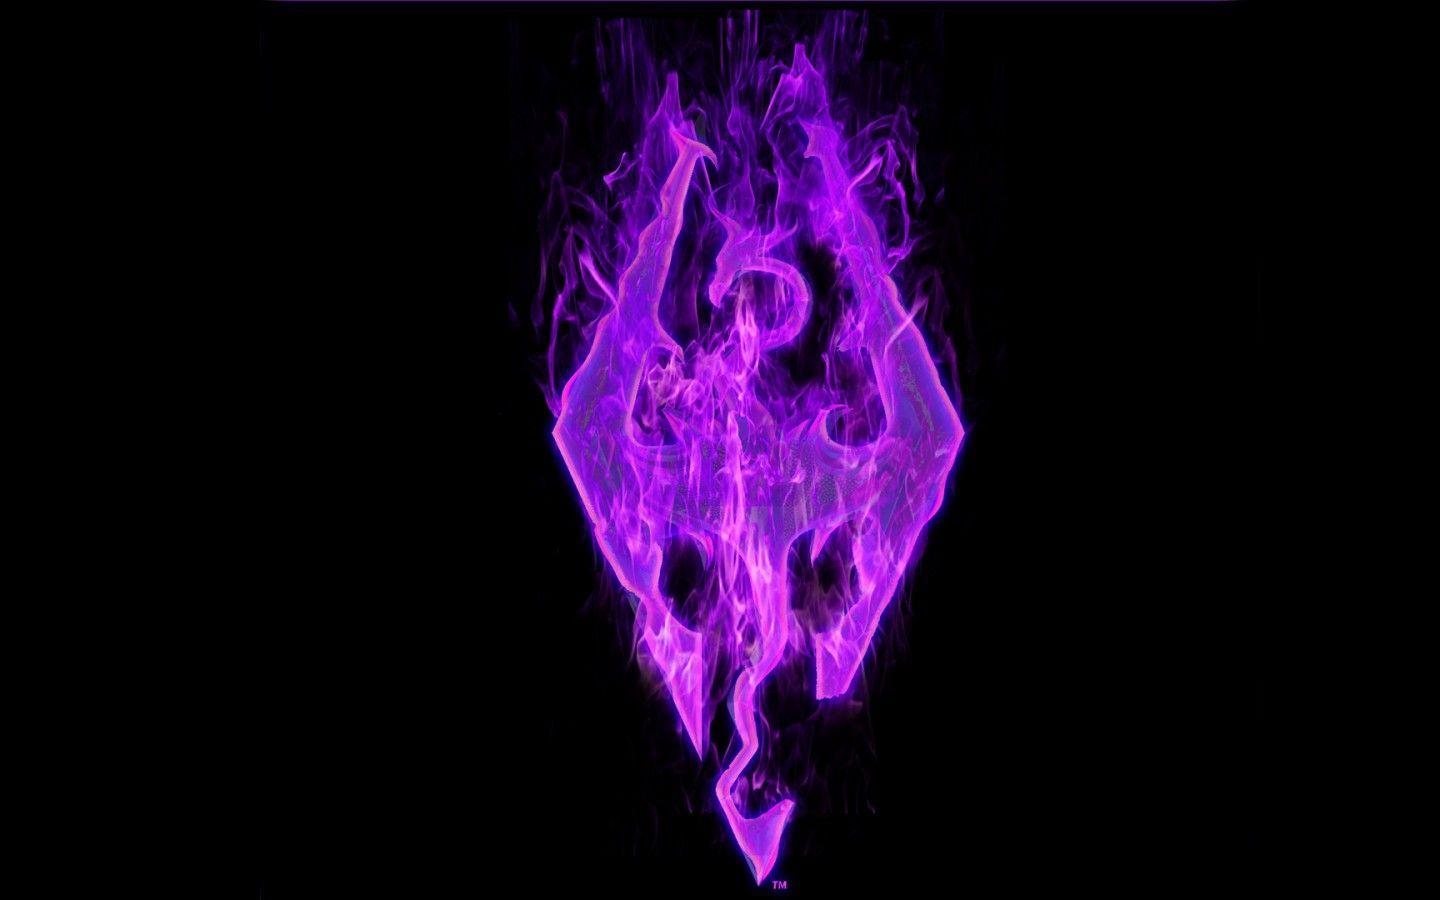 The Skyrim logo on fire with purple flames. Cool